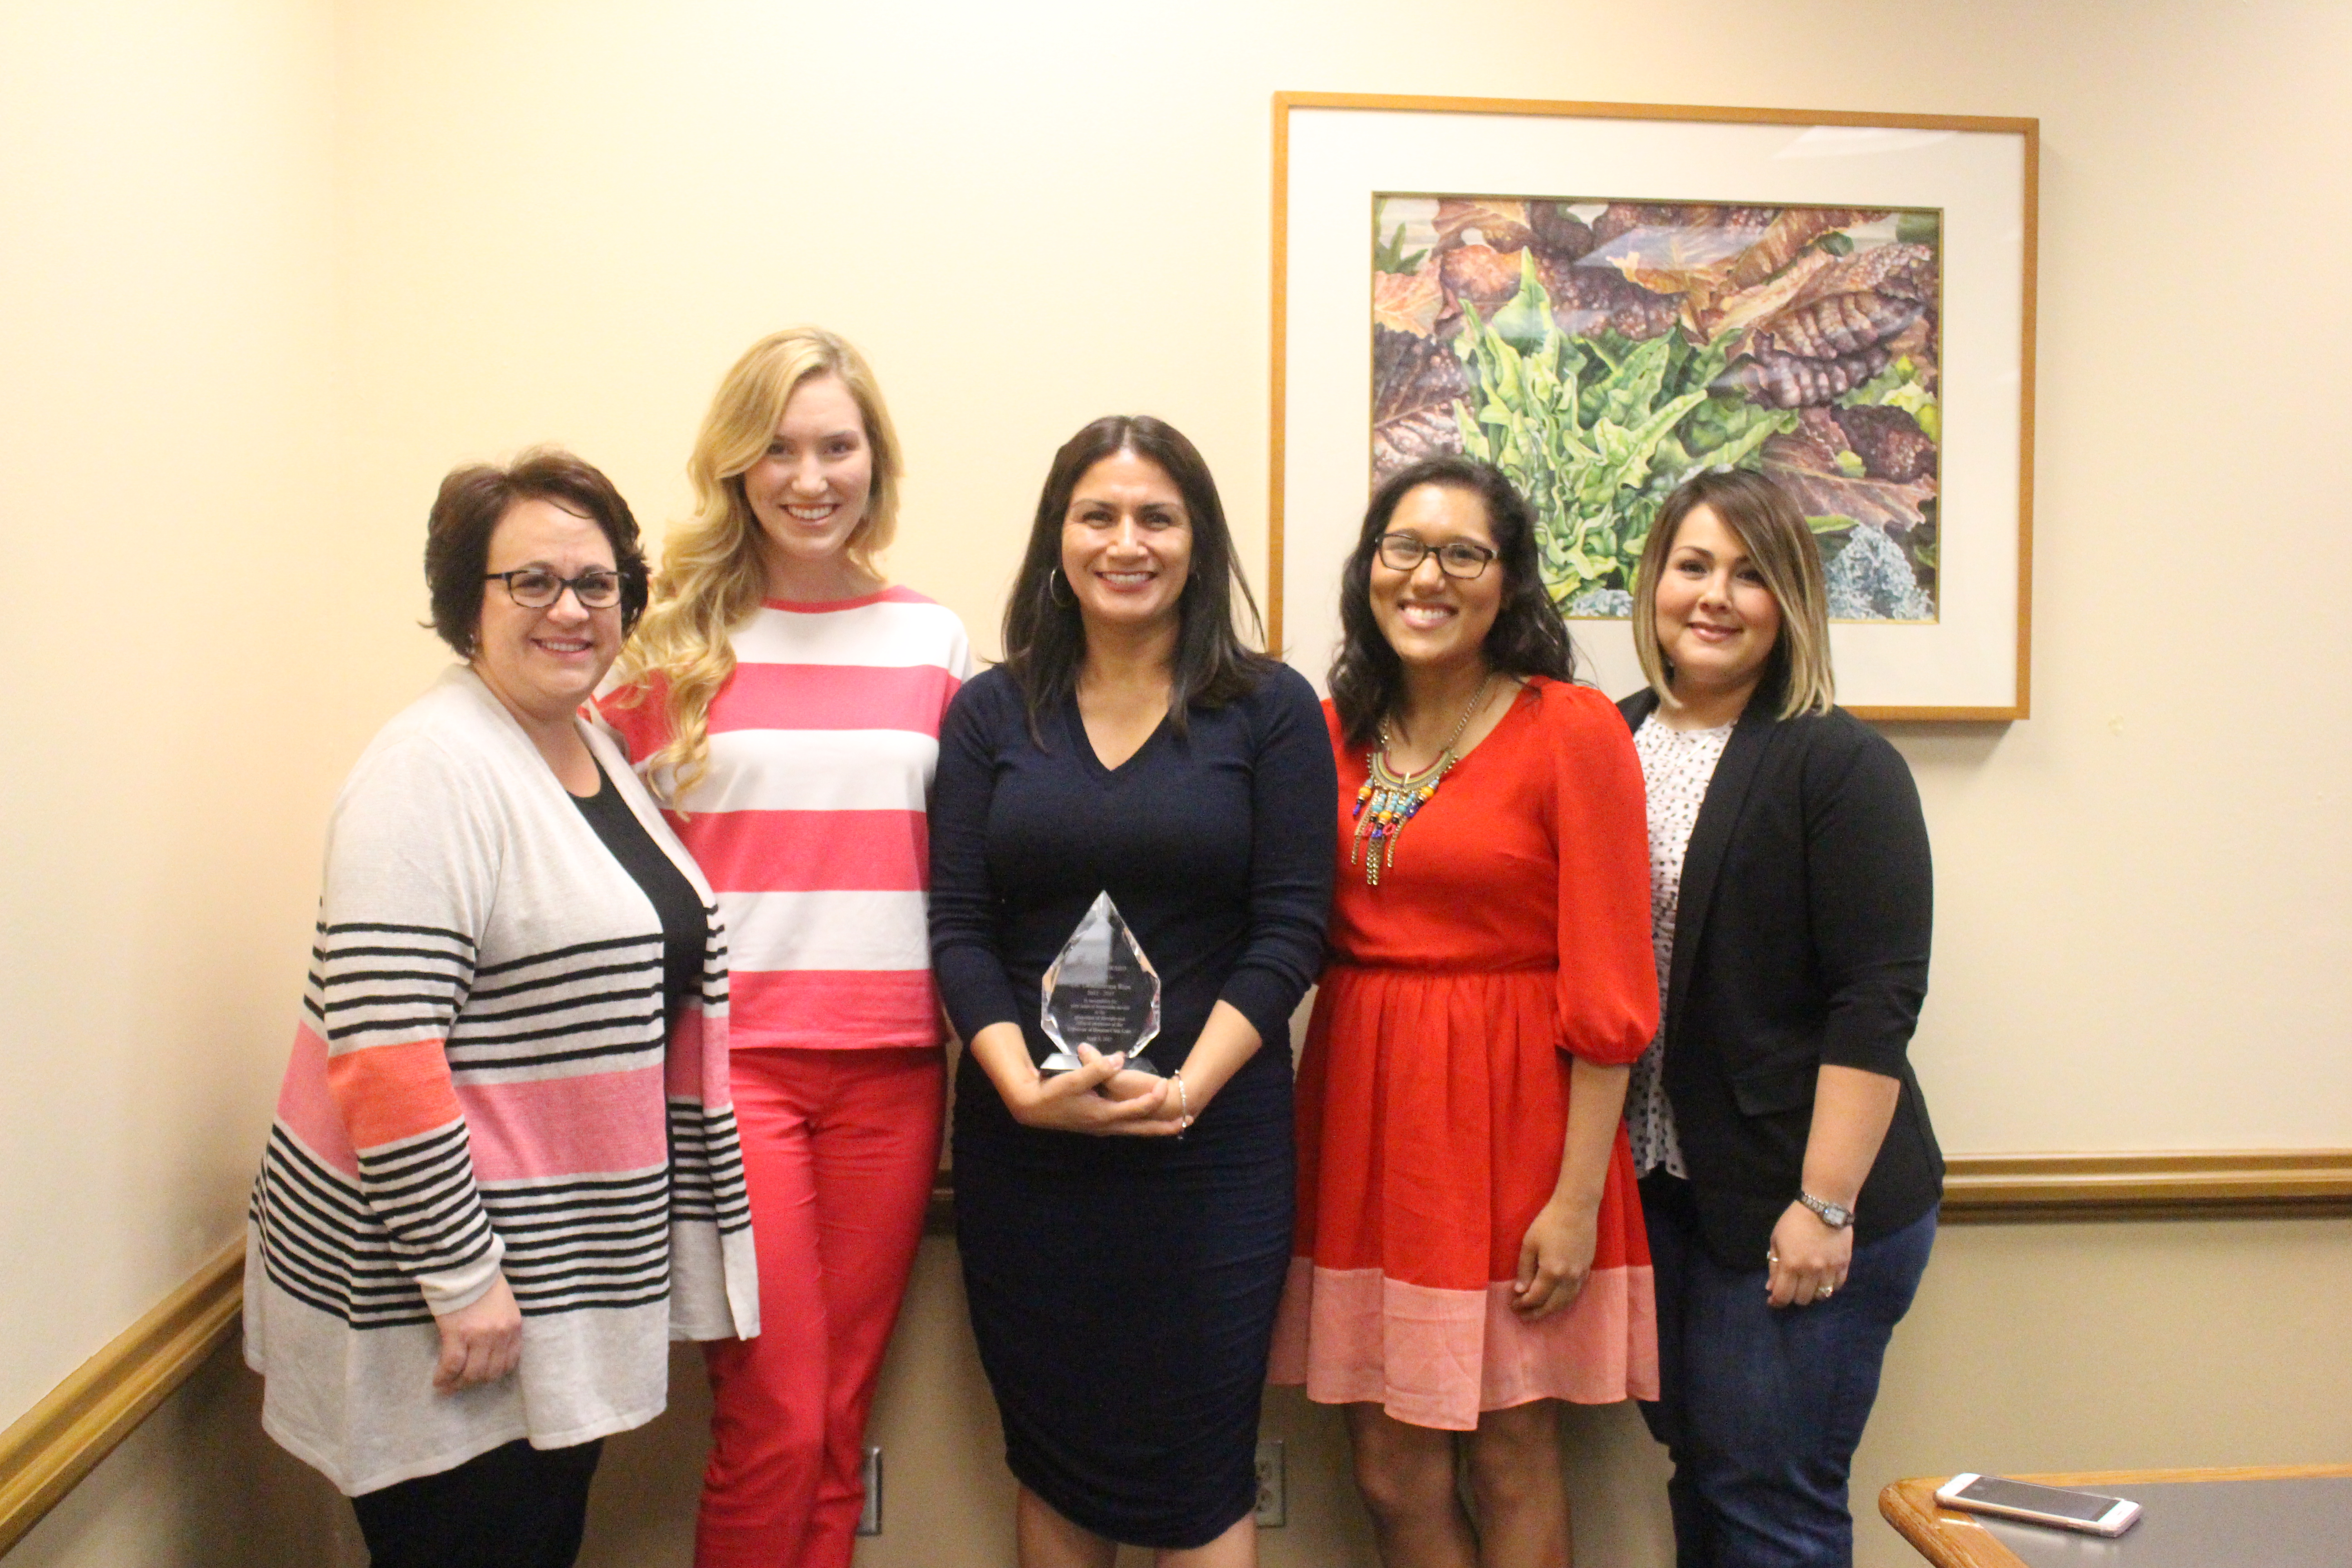 Dr. Rios and the Group Recognition of the Honoree. (left to right) Beth Rainey, Meghan Johnson, Dr. Rios, Shannen Garza, and Erica Solas. Photo courtesy of Office of Student Diversity, Equity and Inclusion.